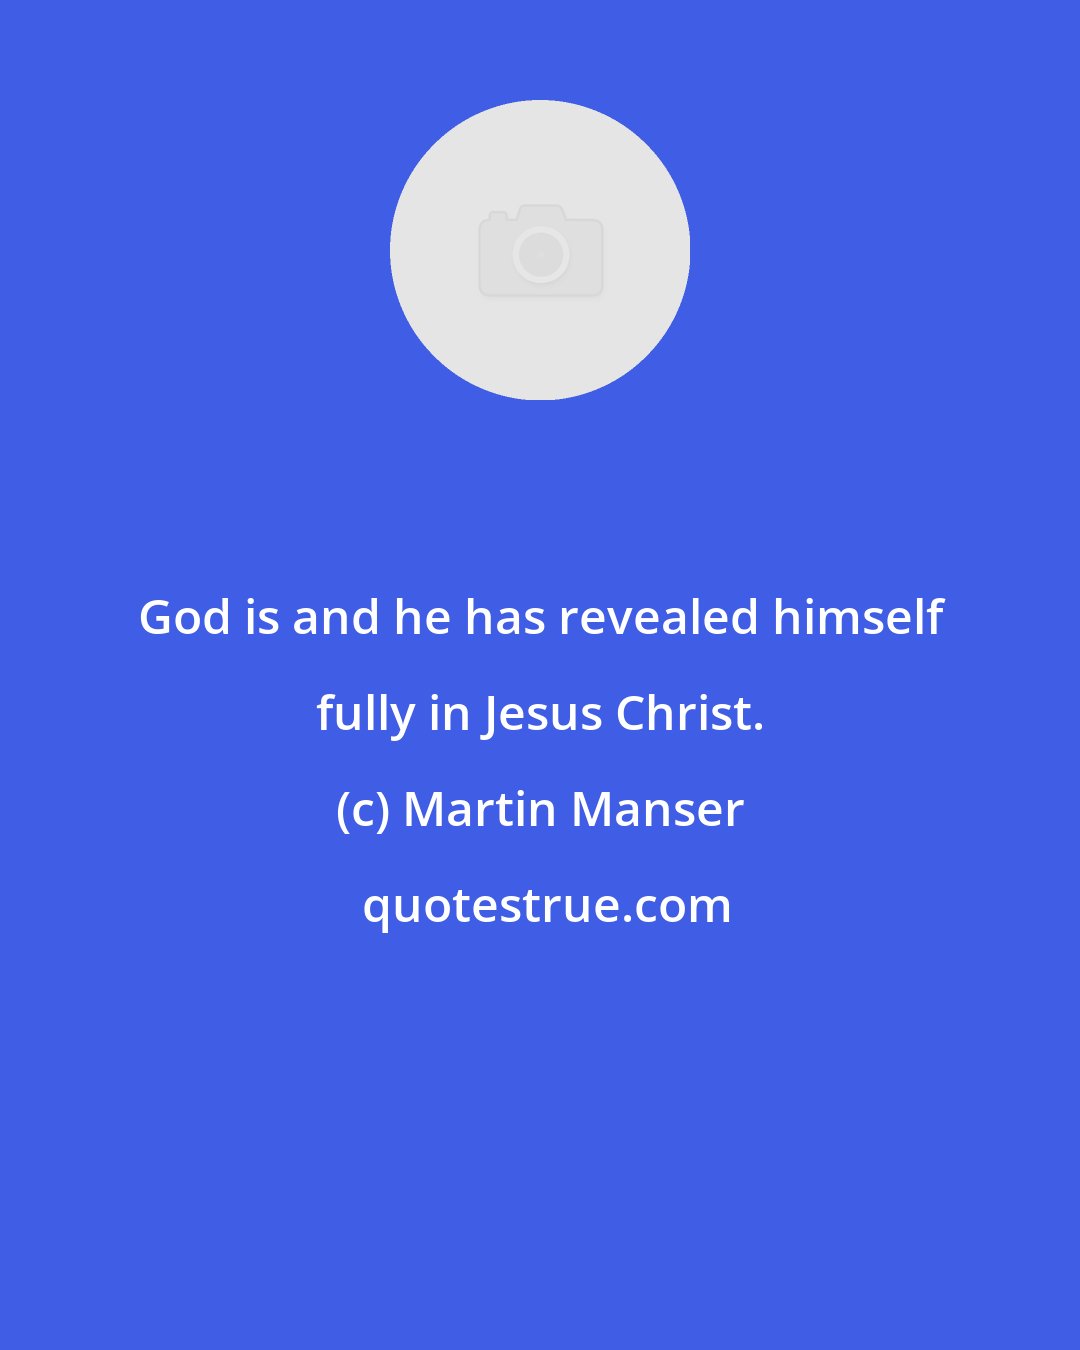 Martin Manser: God is and he has revealed himself fully in Jesus Christ.